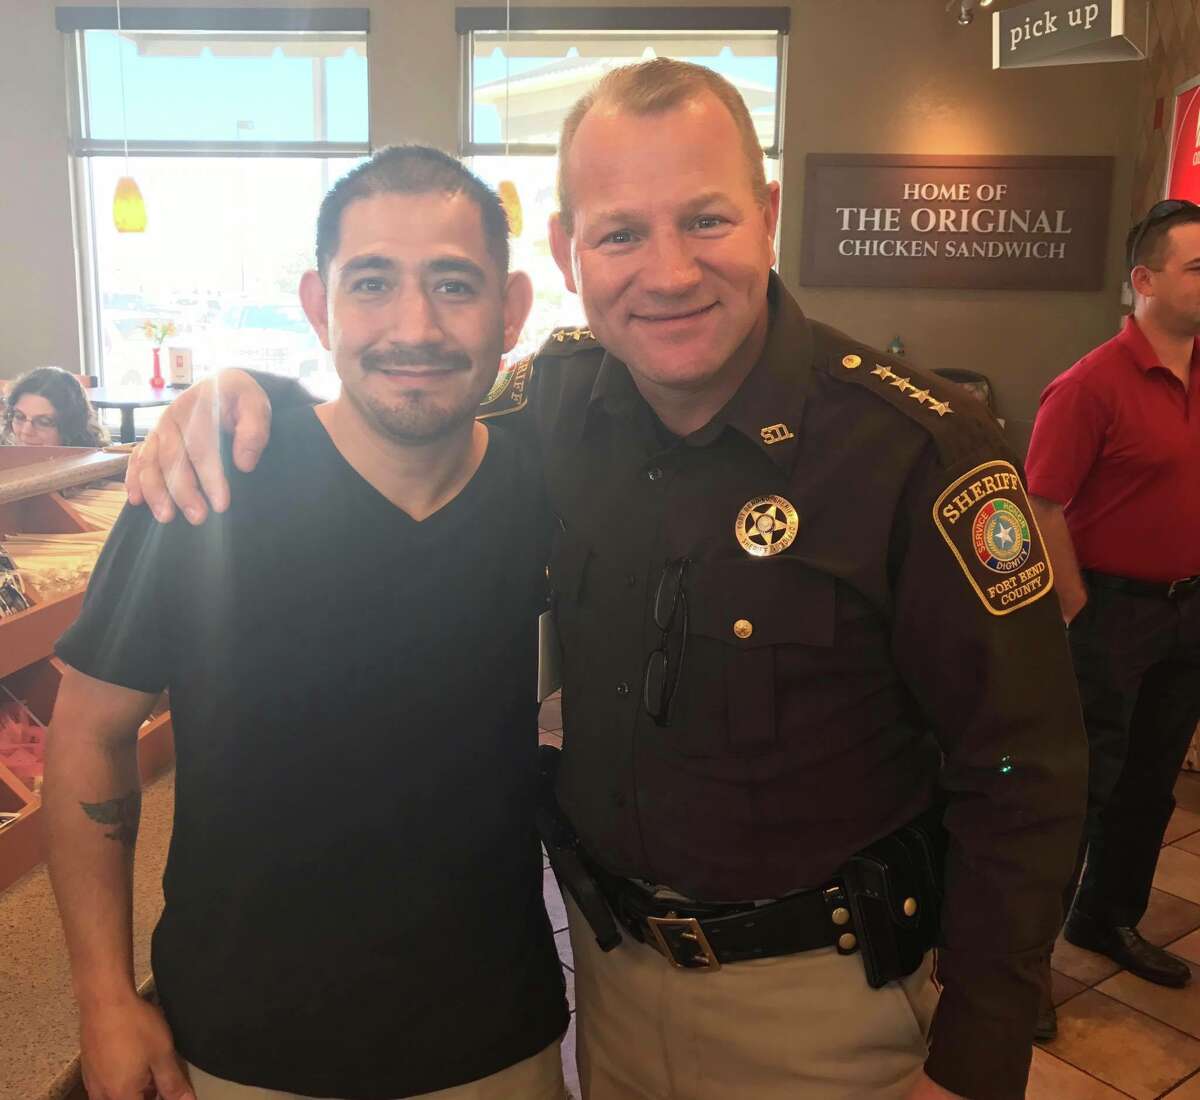 Louis Palacios, left, said he is grateful to Sheriff Troy Nehls, who used the Heimlich maneuver to save Palacios from choking at the Rosenberg Chick-Fil-A on Feb. 22, 2017.